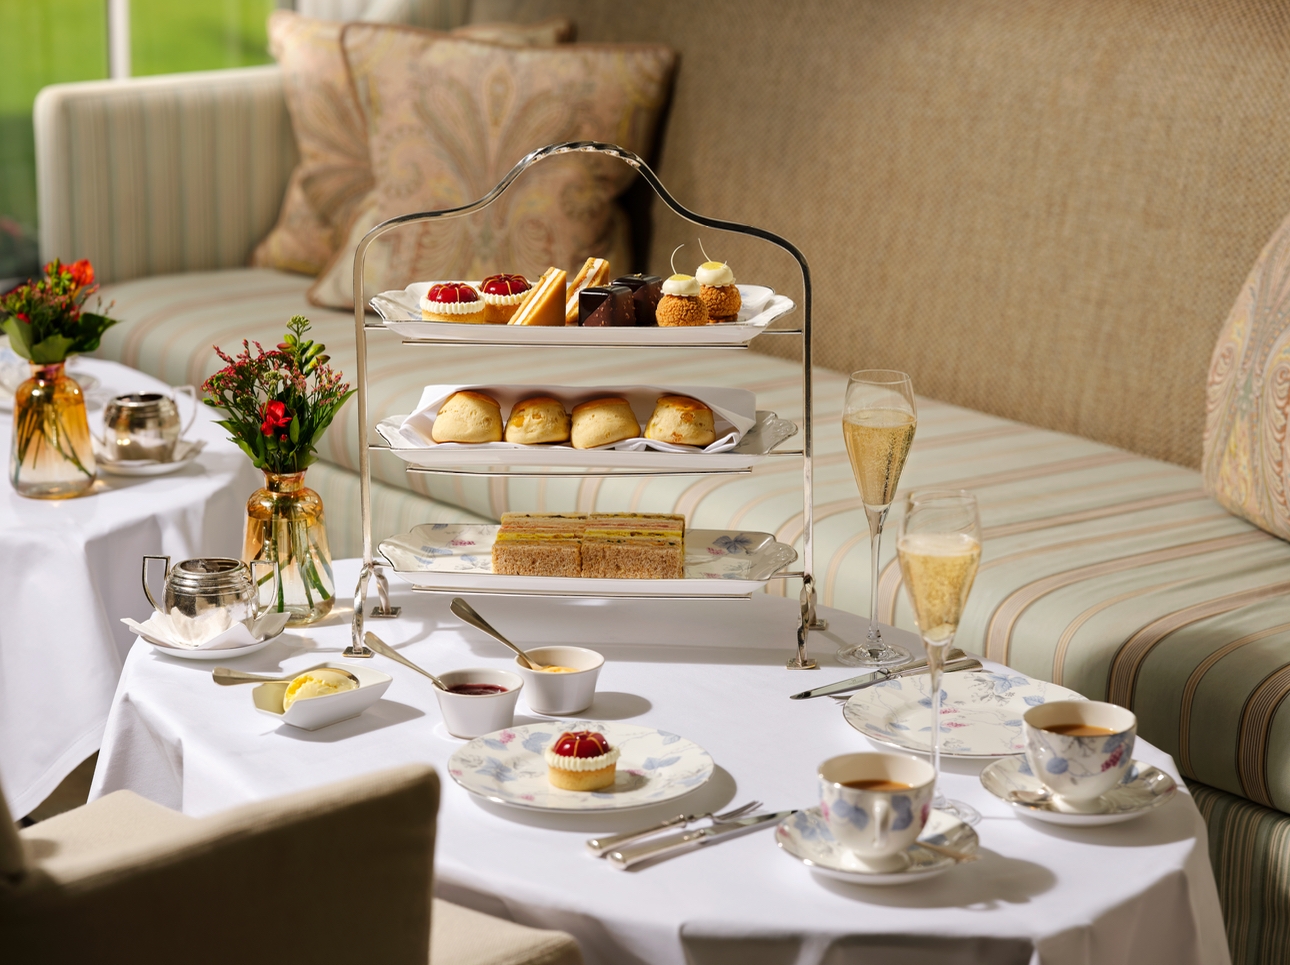 Coronation afternoon tea at Coworth Park available until 21st May